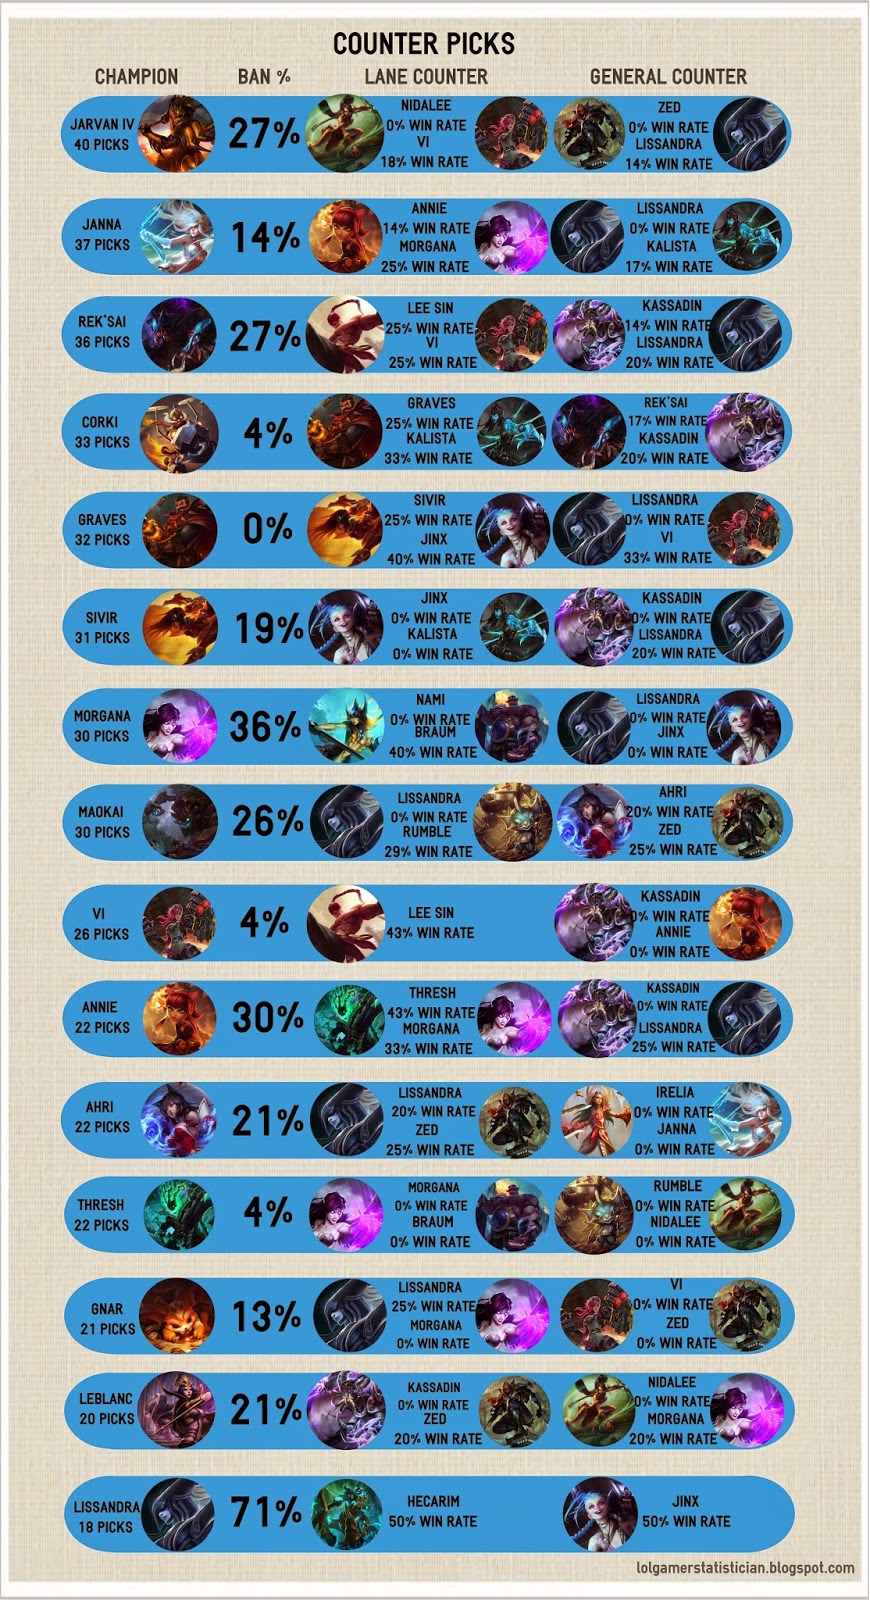 The LoL Gamer Statistician: NA Champion (Part 2 of Picks [Infographic]